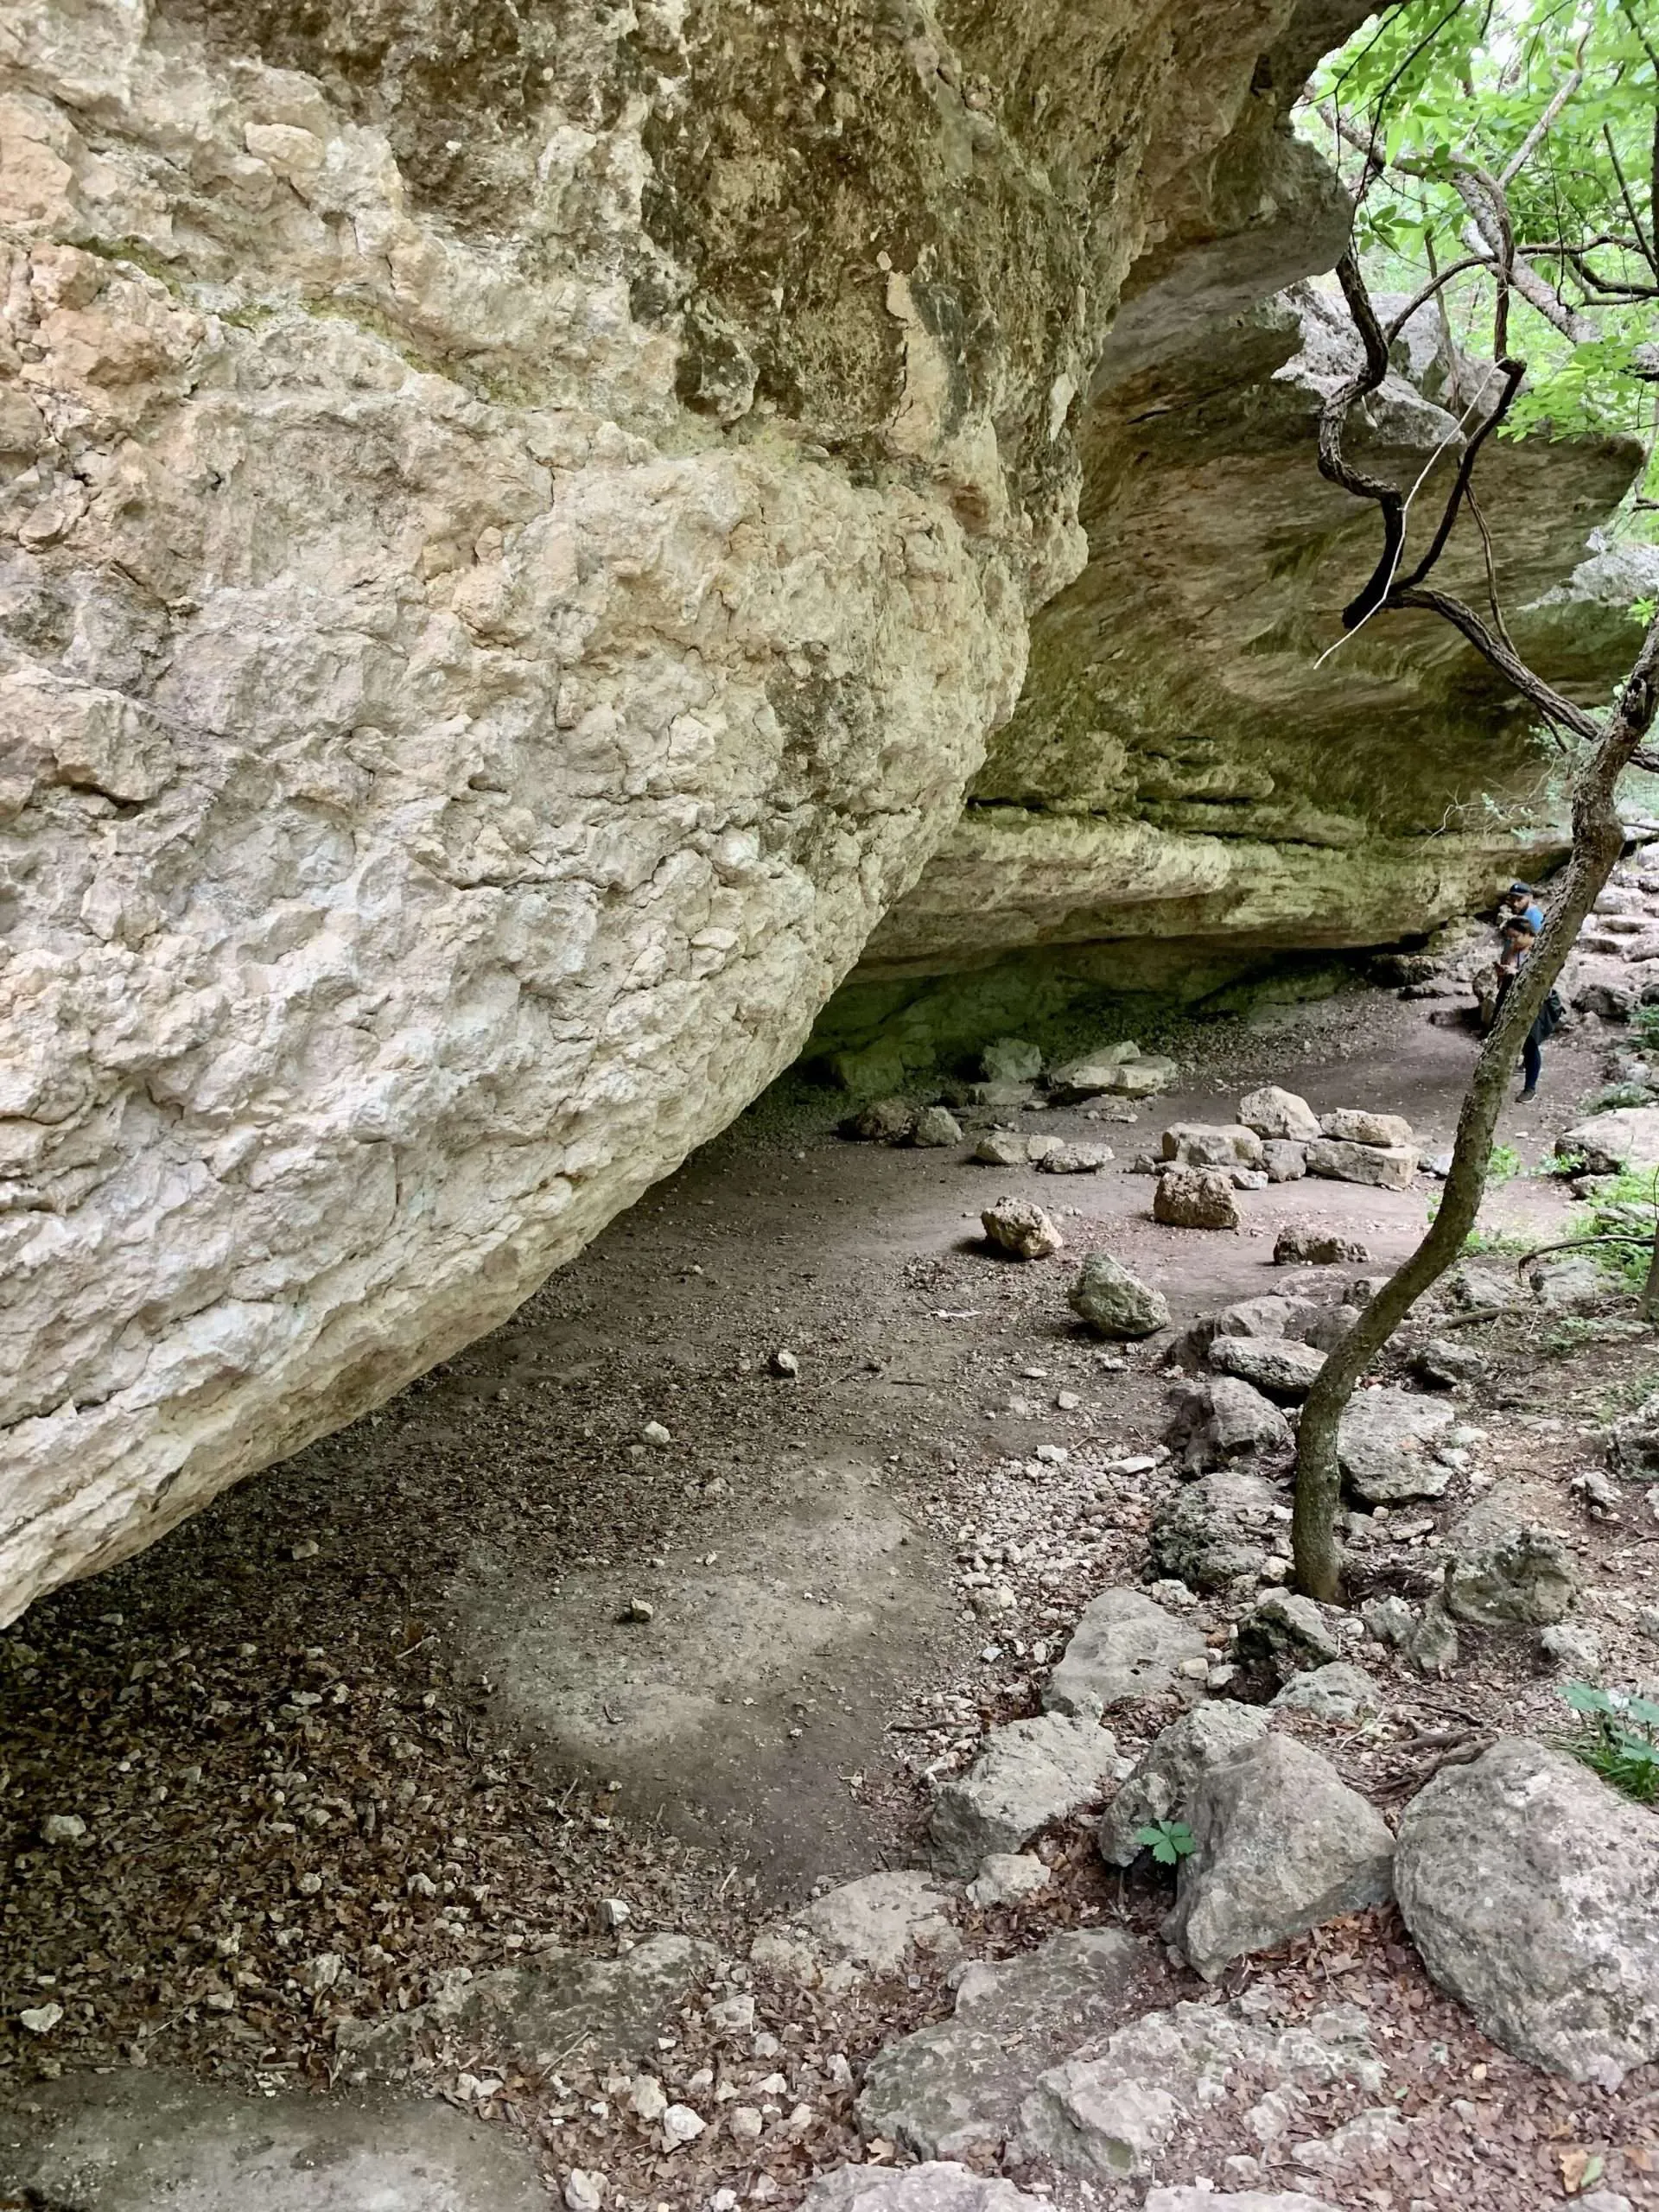 Tonkawa Cave at Mother Neff State Park.